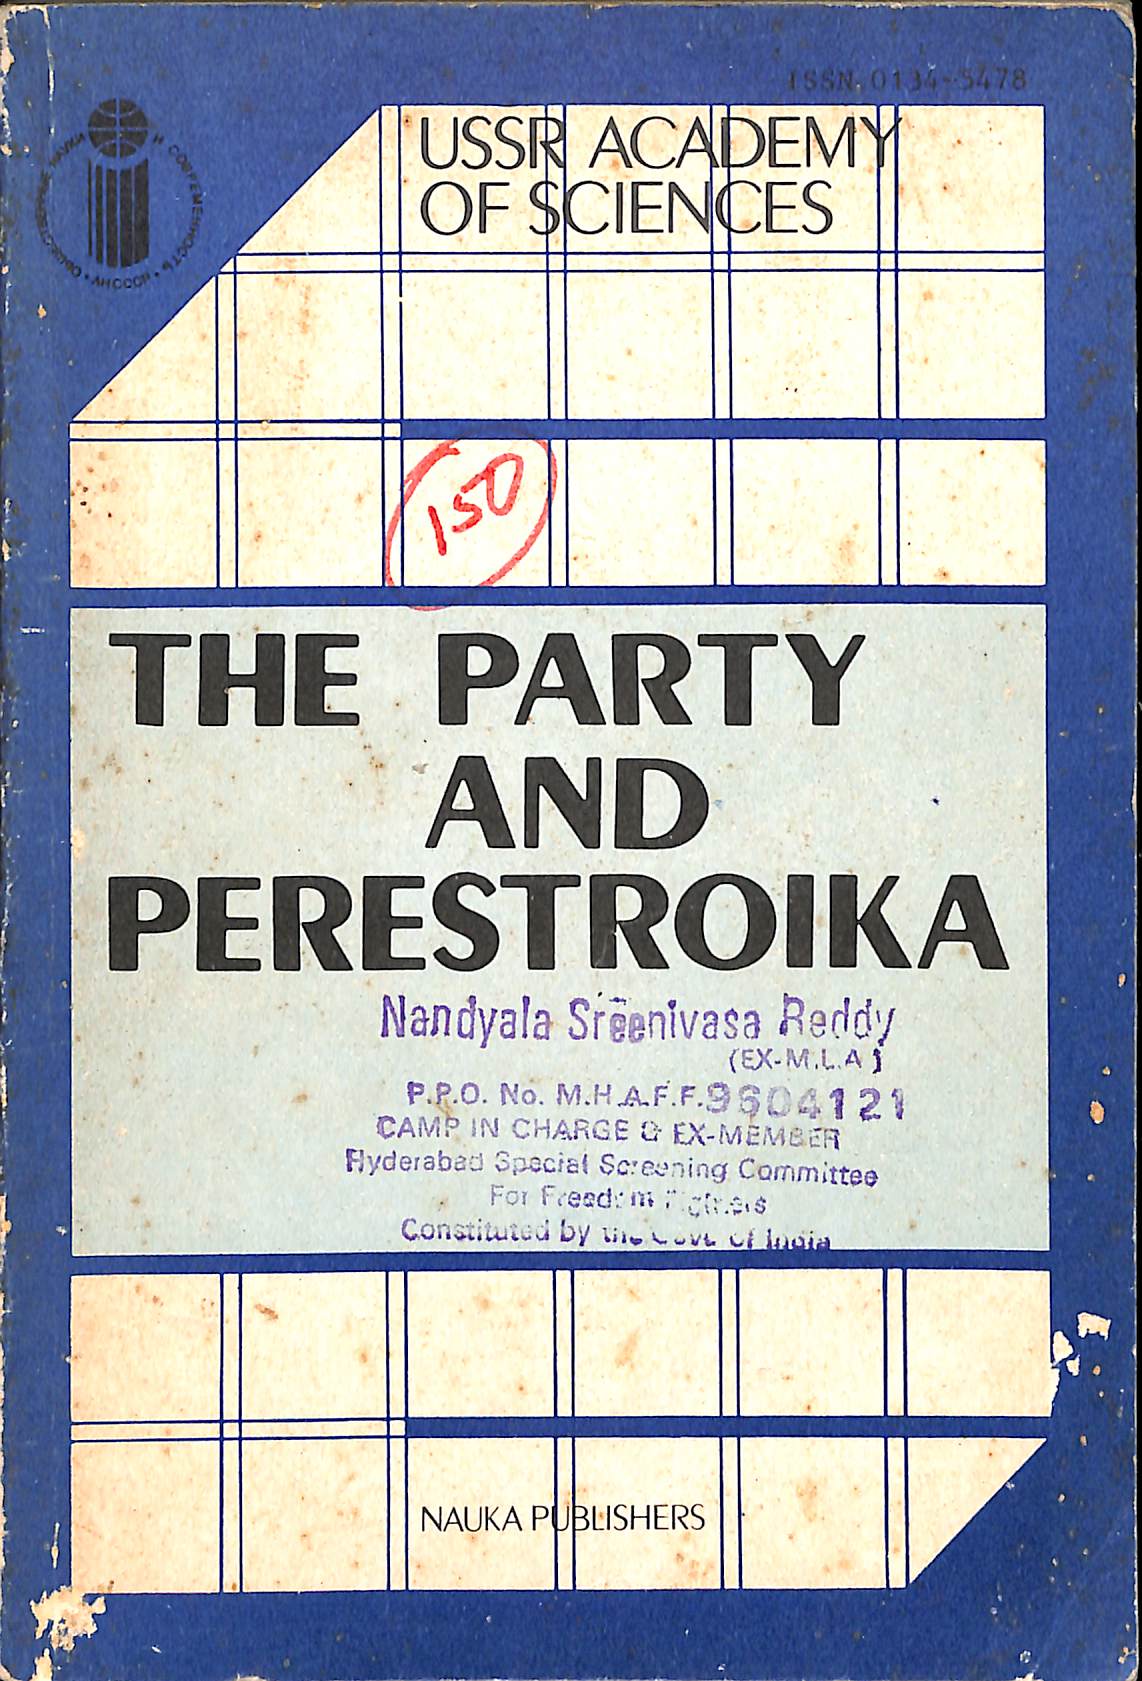 The party and perestroika